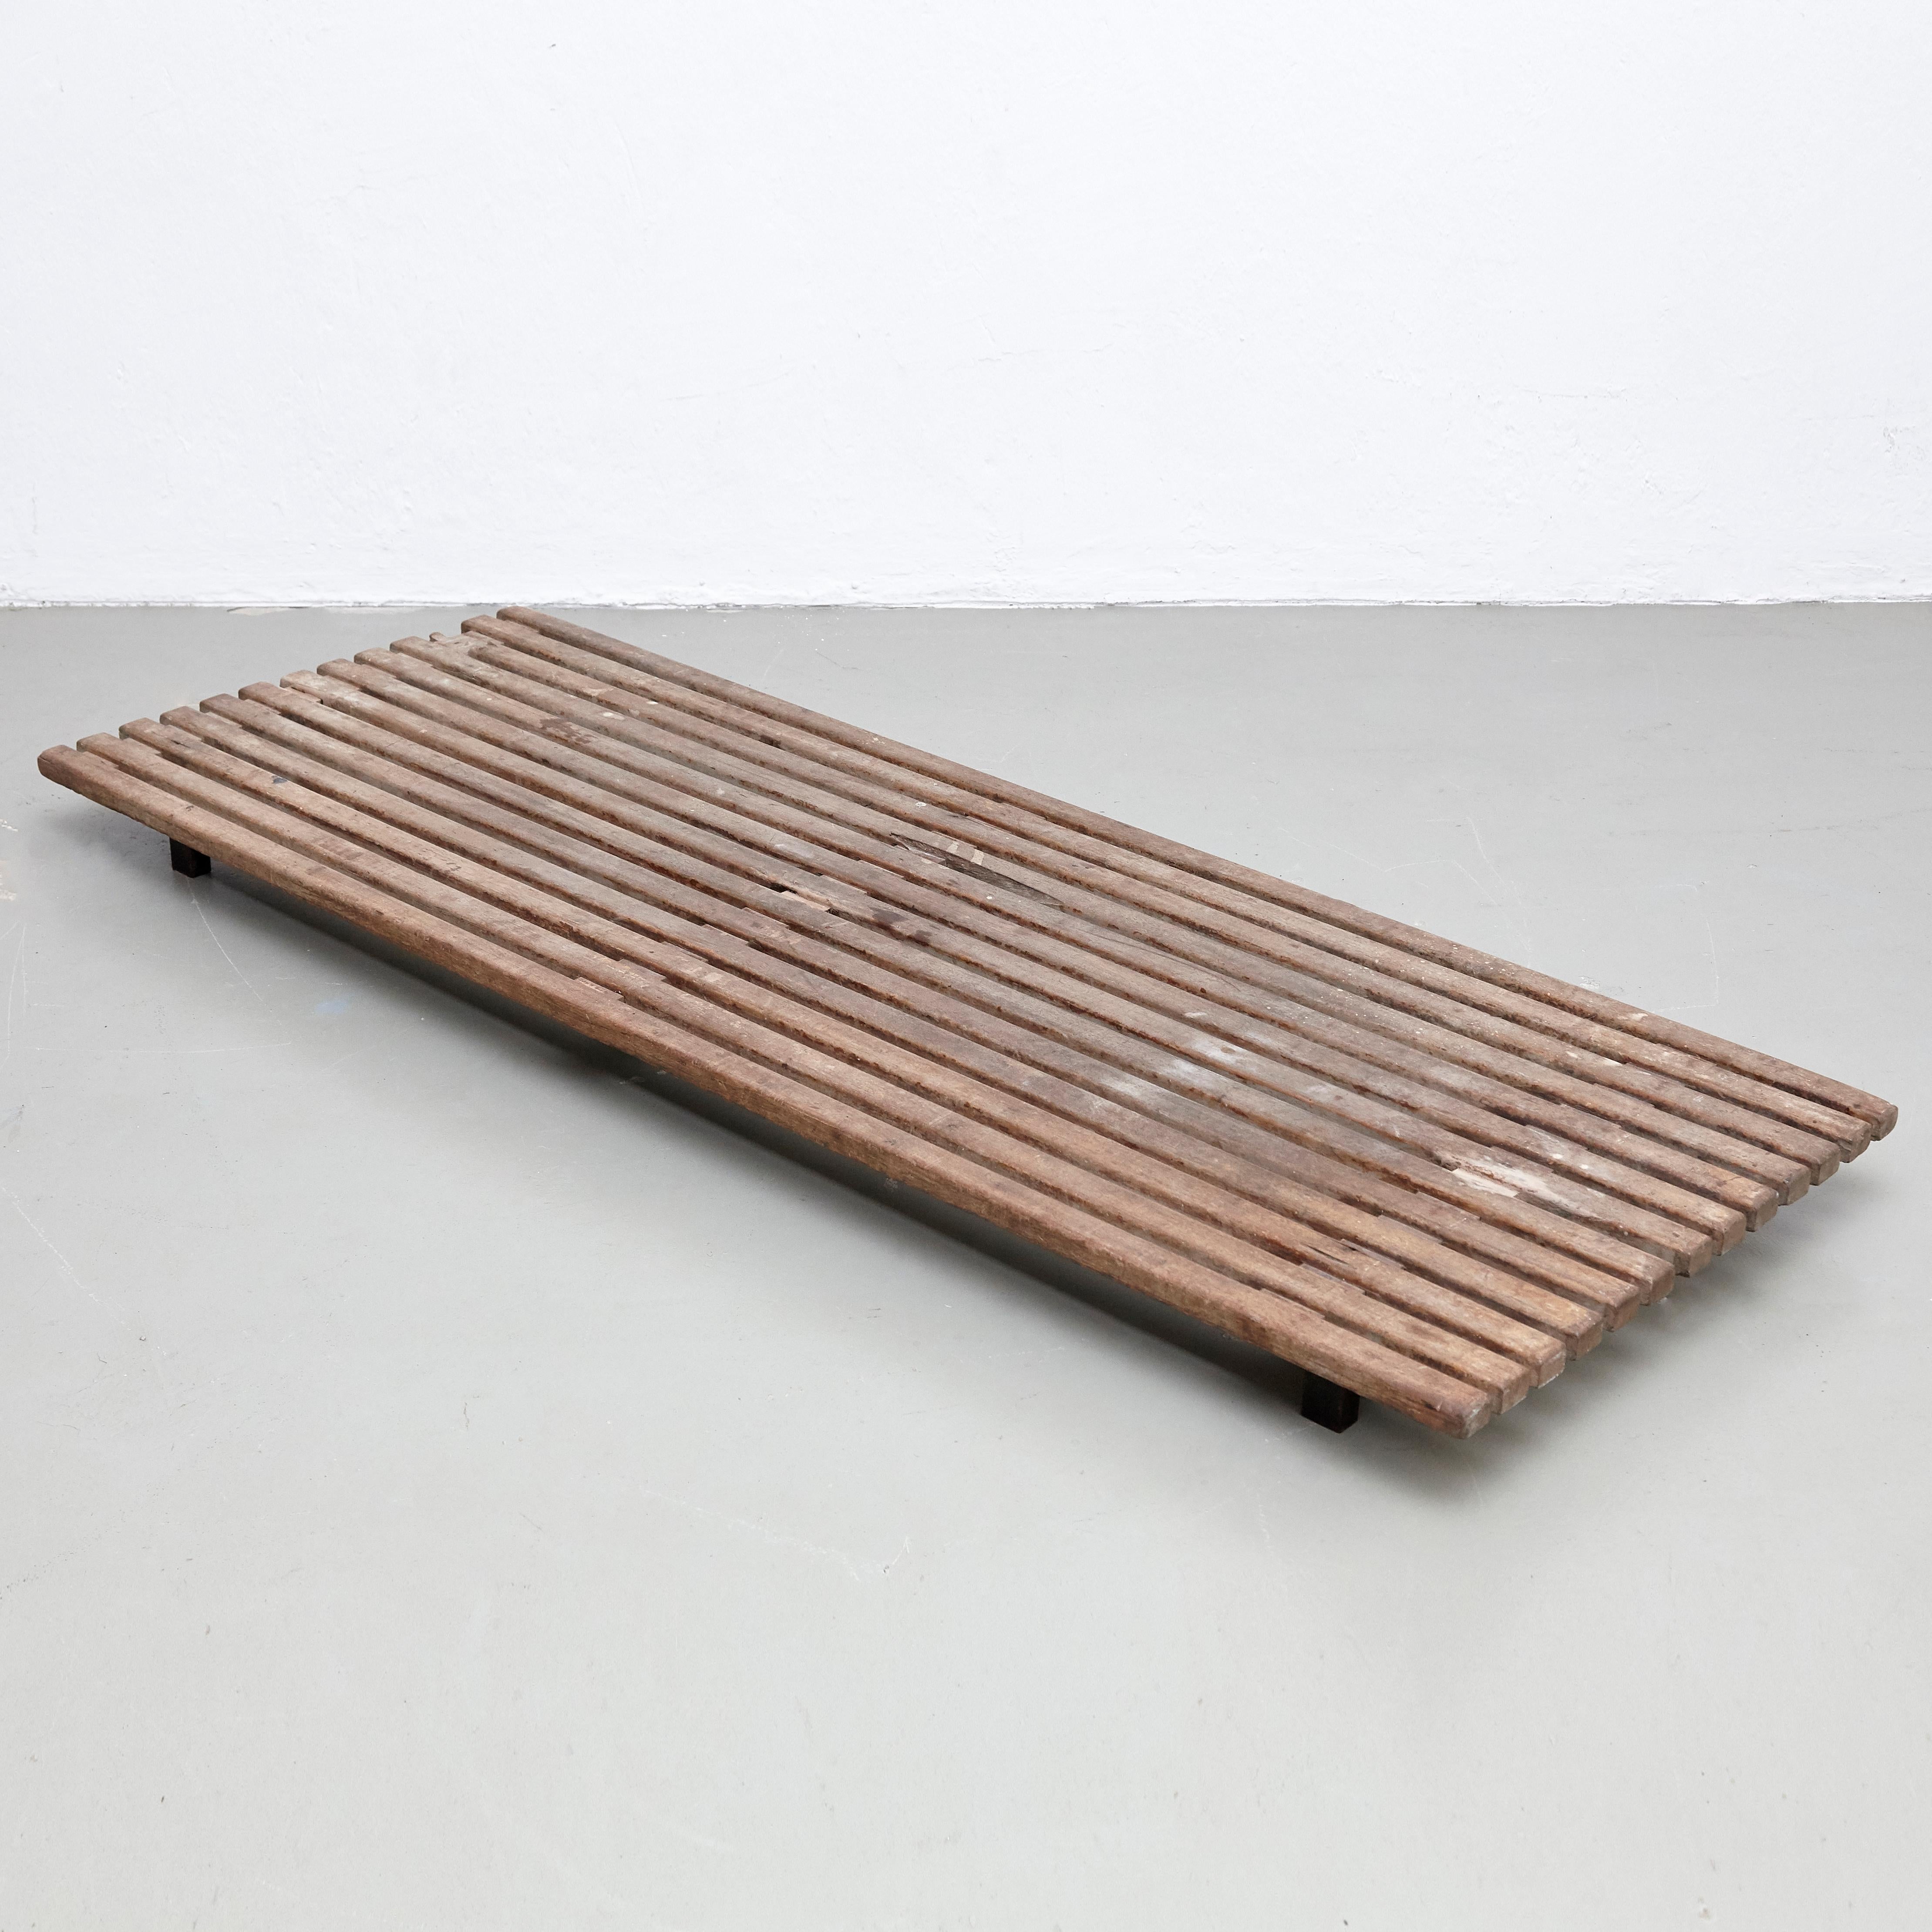 Bench designed by Charlotte Perriand, circa 1950.
Manufactured by Steph Simon (France), circa 1950.
Wood, lacquered metal frame and legs.

Provenance: Cansado, Mauritania (Africa).

In original condition, with minor wear consistent with age